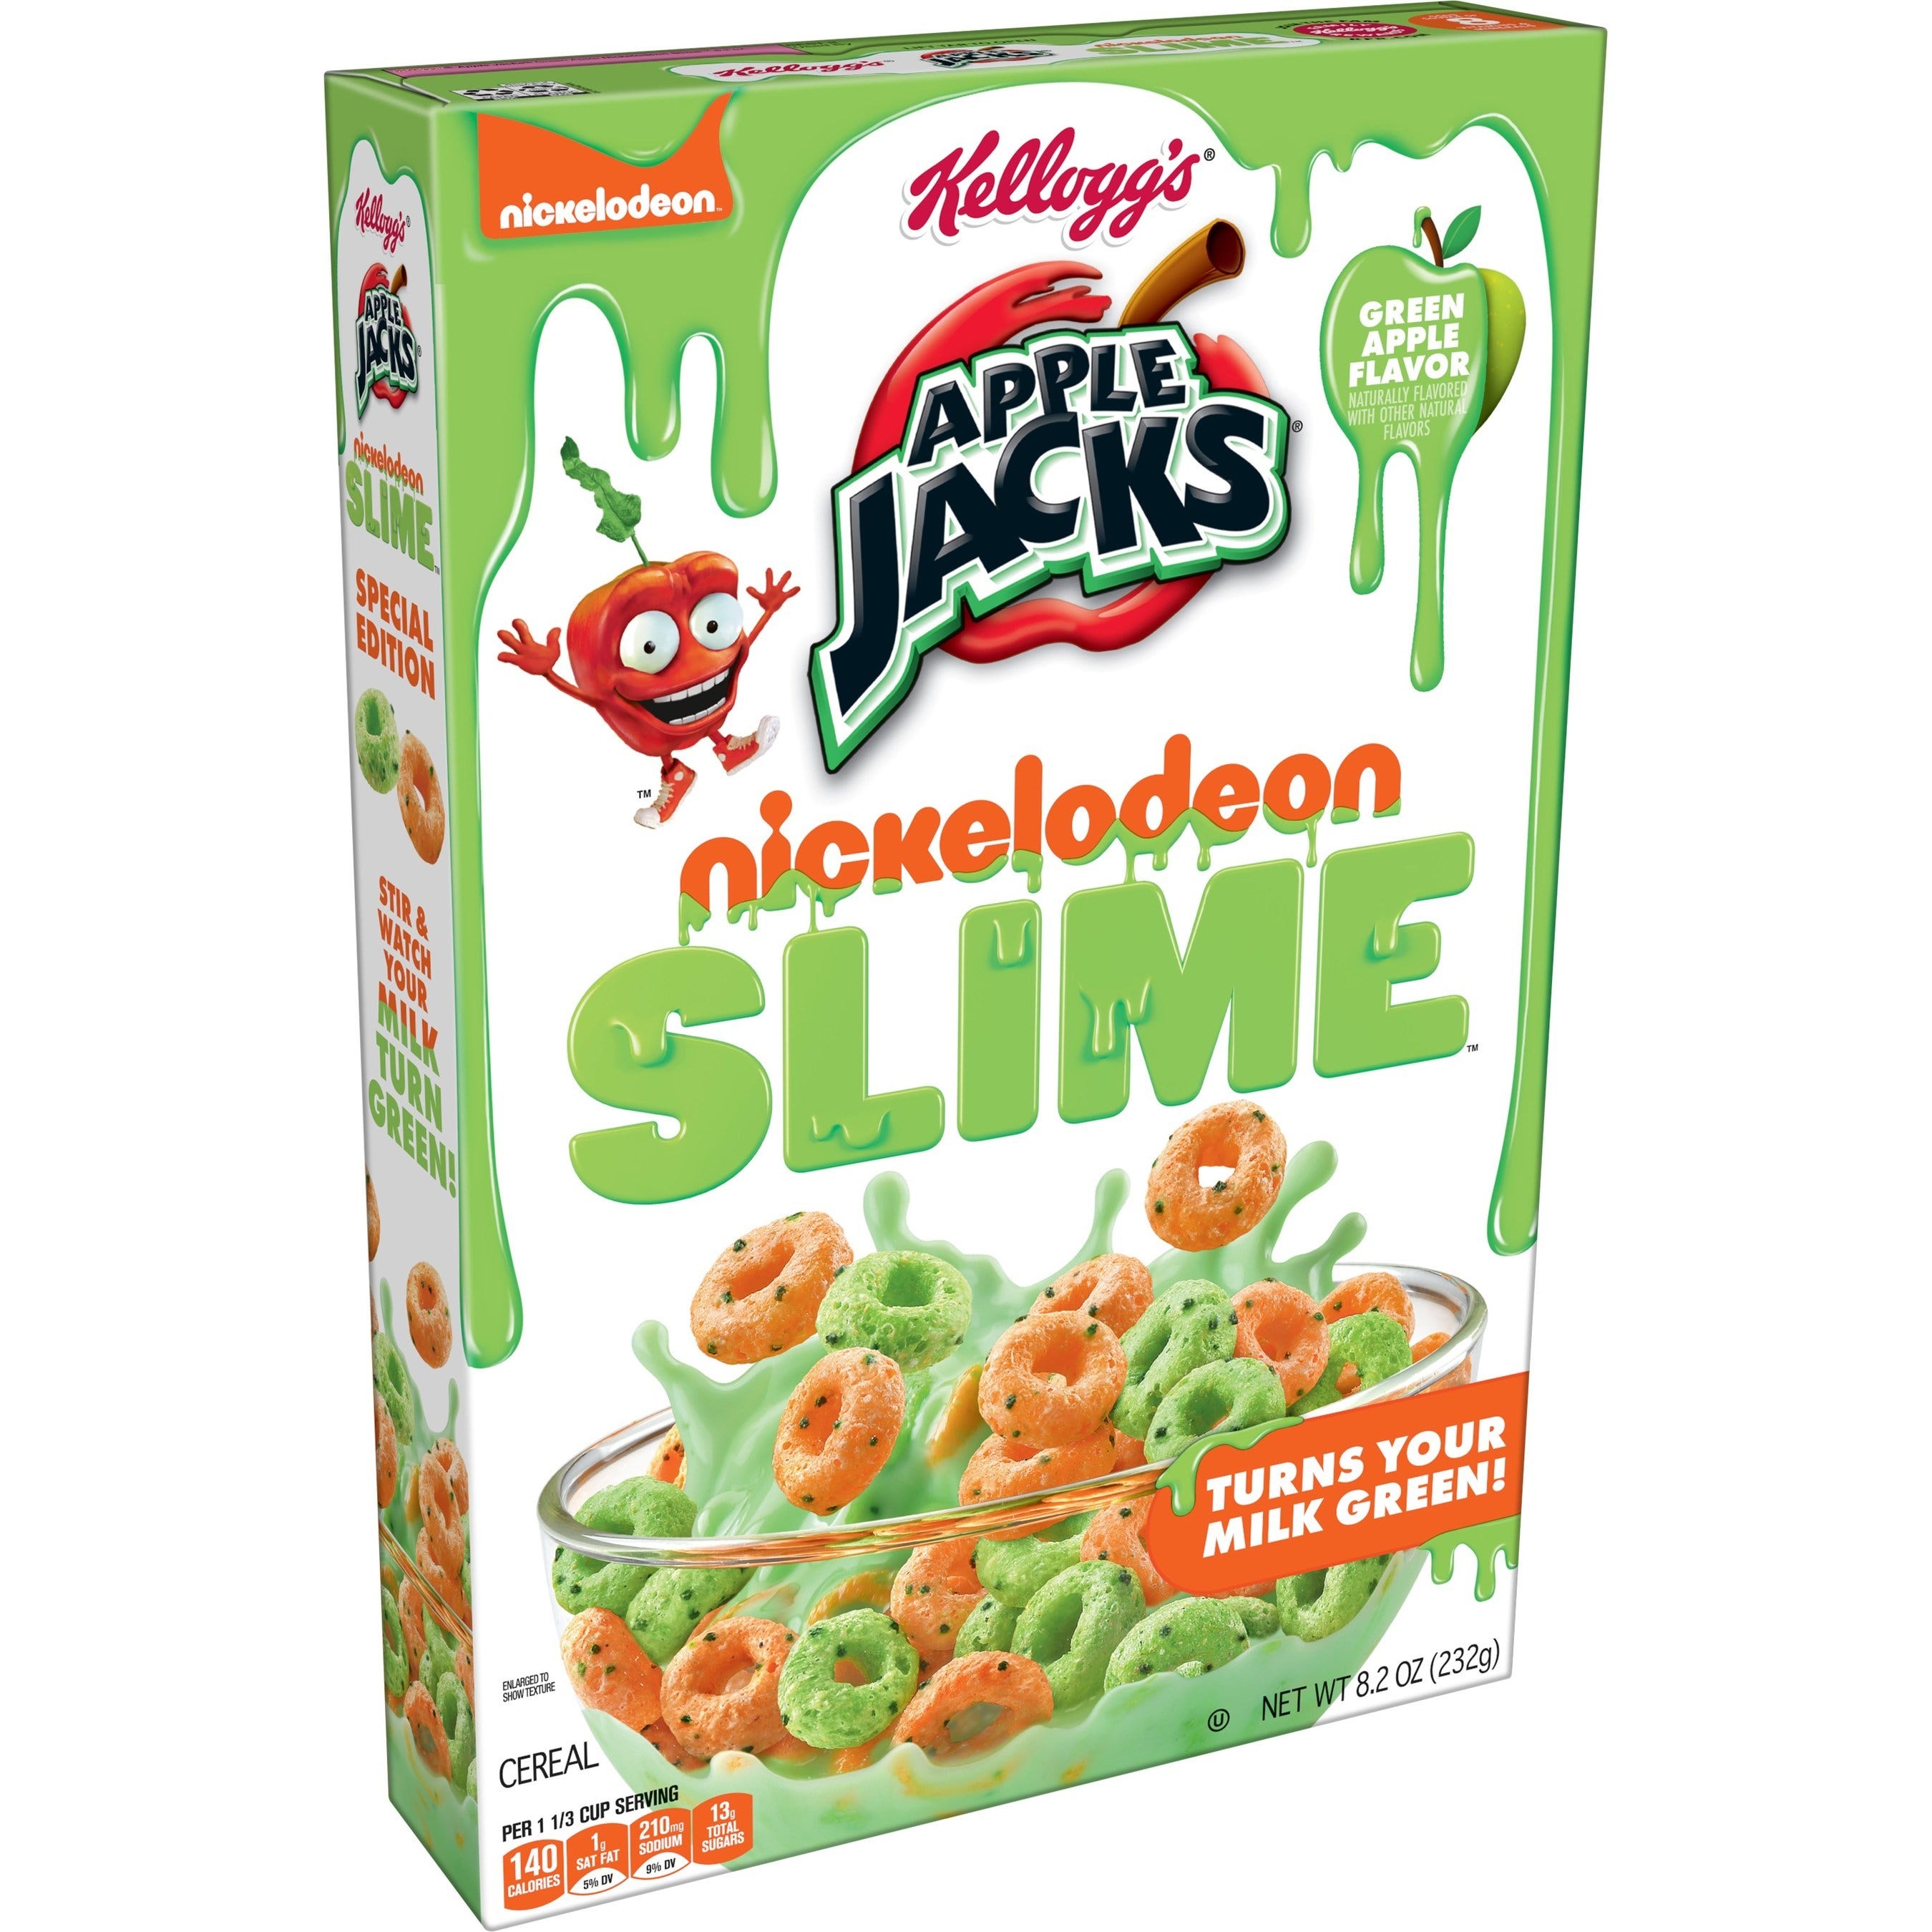 Kellogg, Nickelodeon Launch New Slime Cereal: Check Out What's New